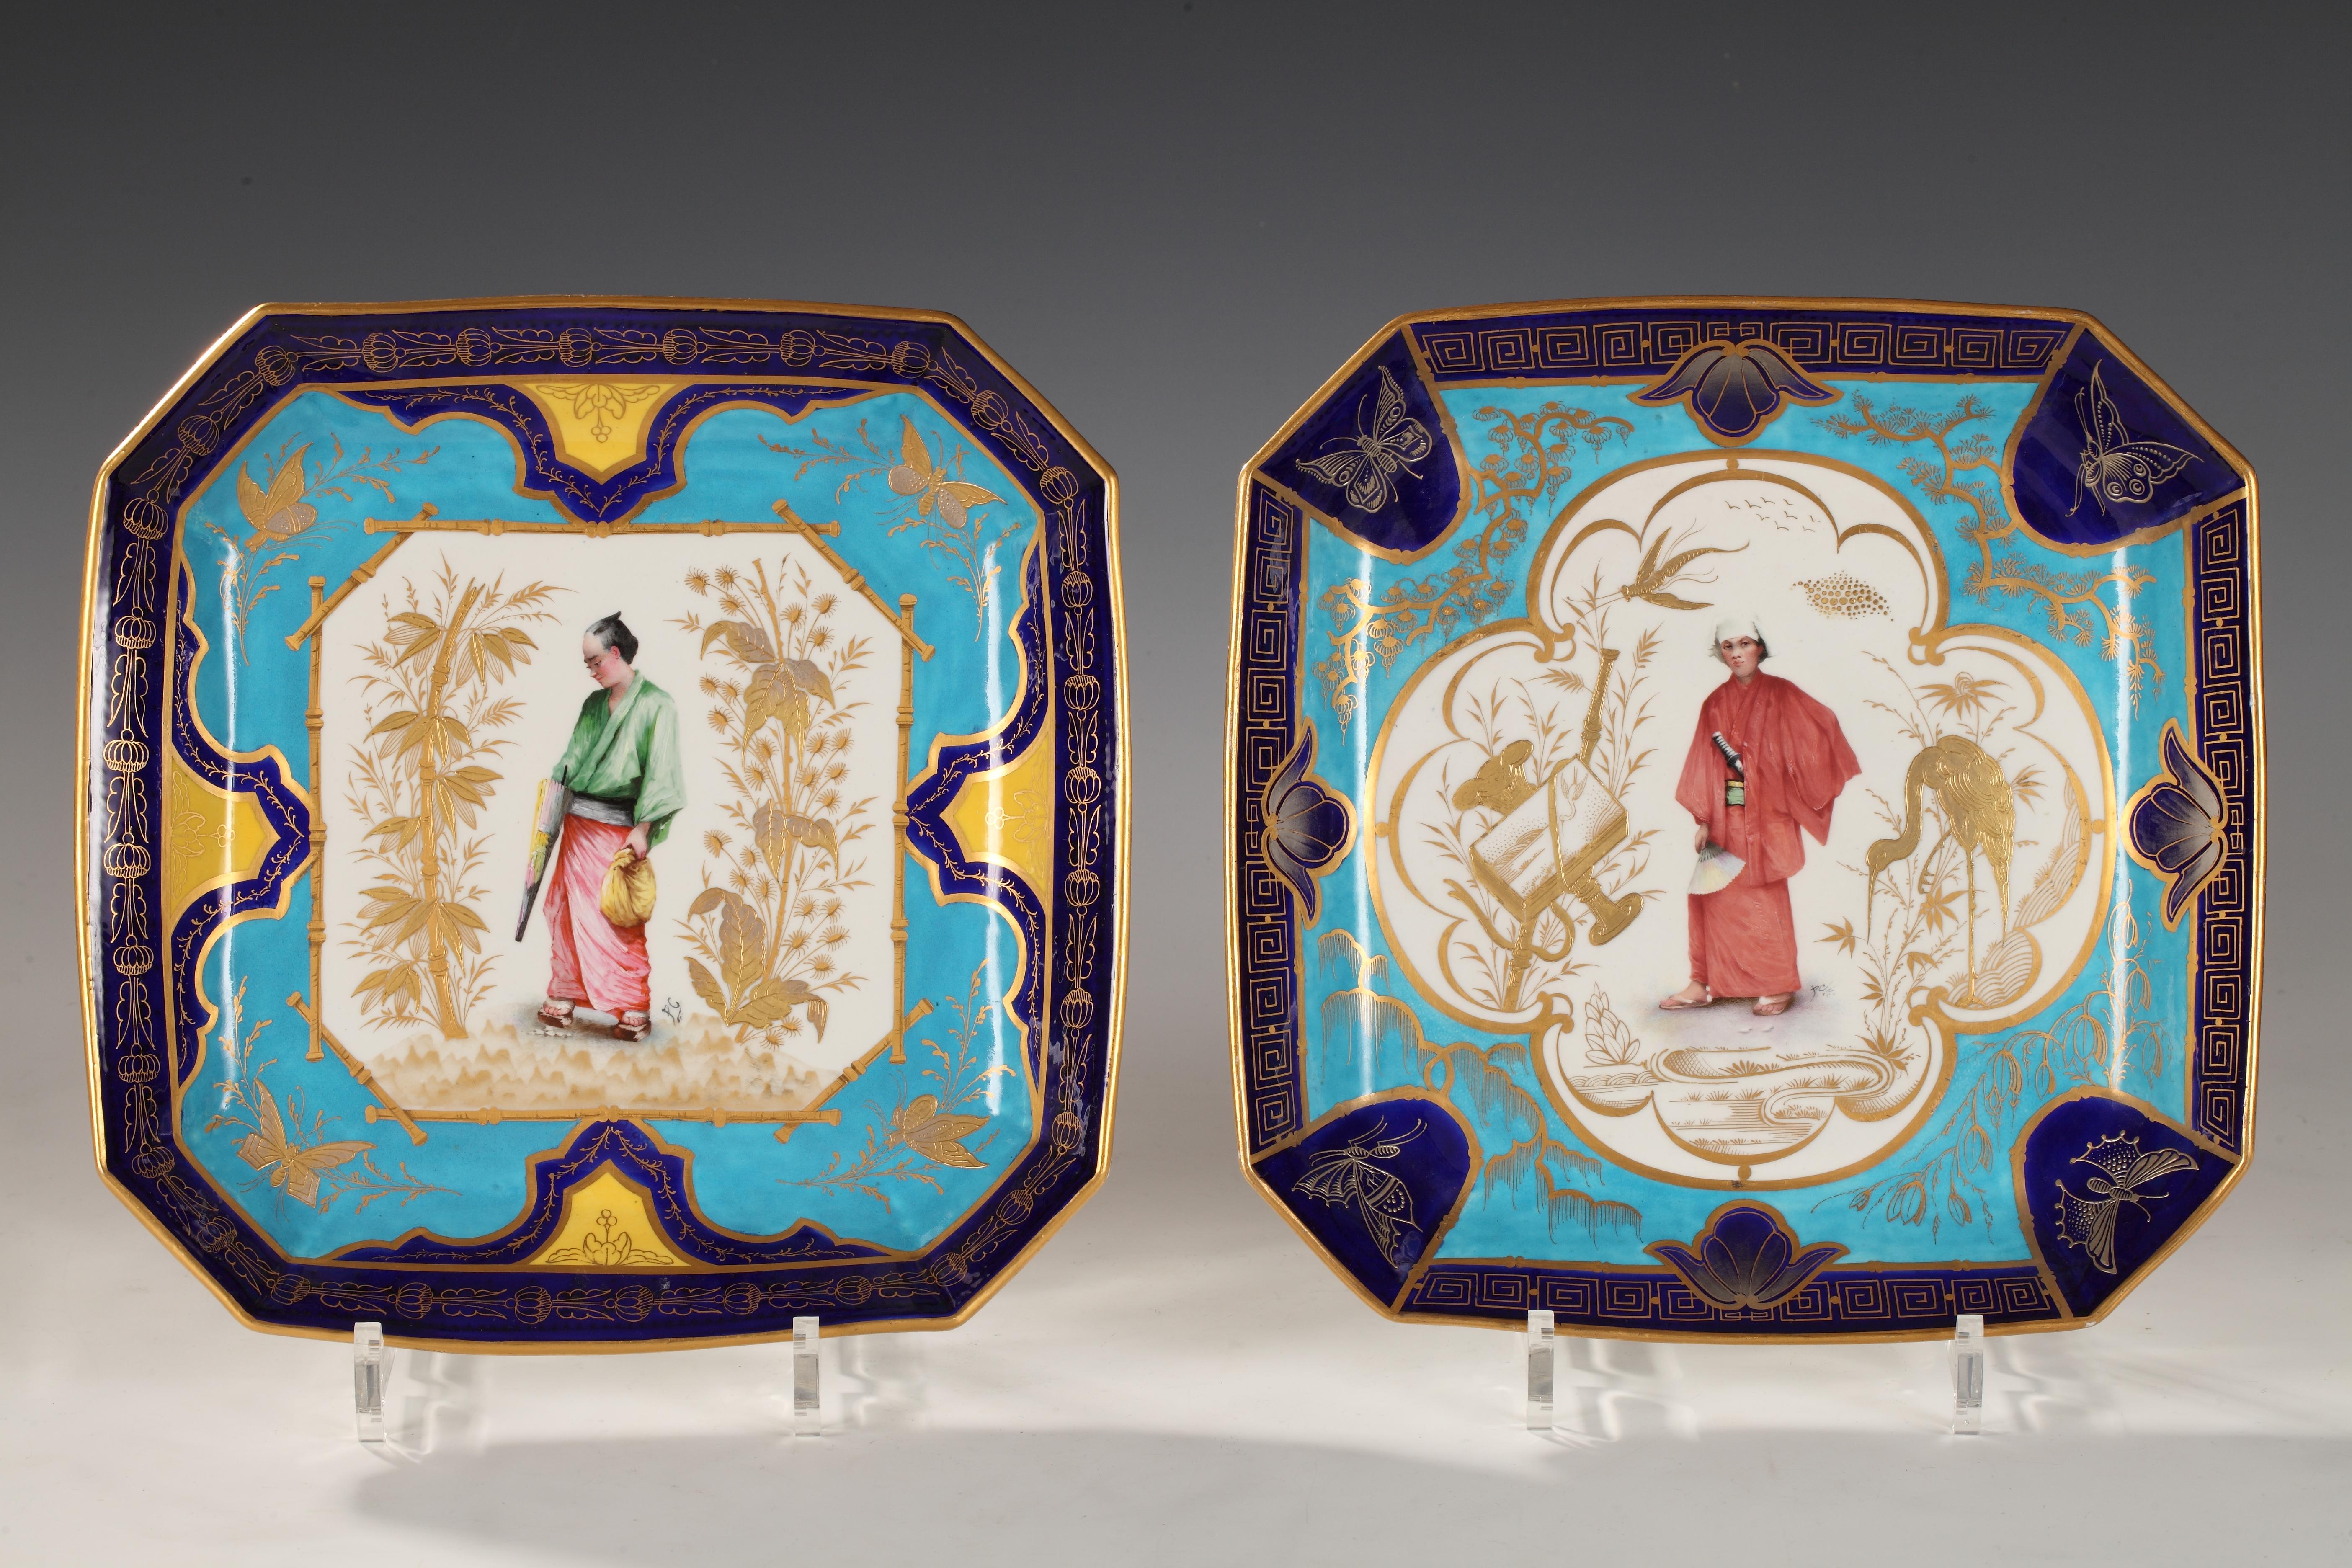 Pair of 18th century soft-paste porcelain dishes finely decorated in the 19th century with medallions representing Japanese theatre characters dressed in traditional costumes, beautiful gold-embossed ornament on a polychrome background.

These